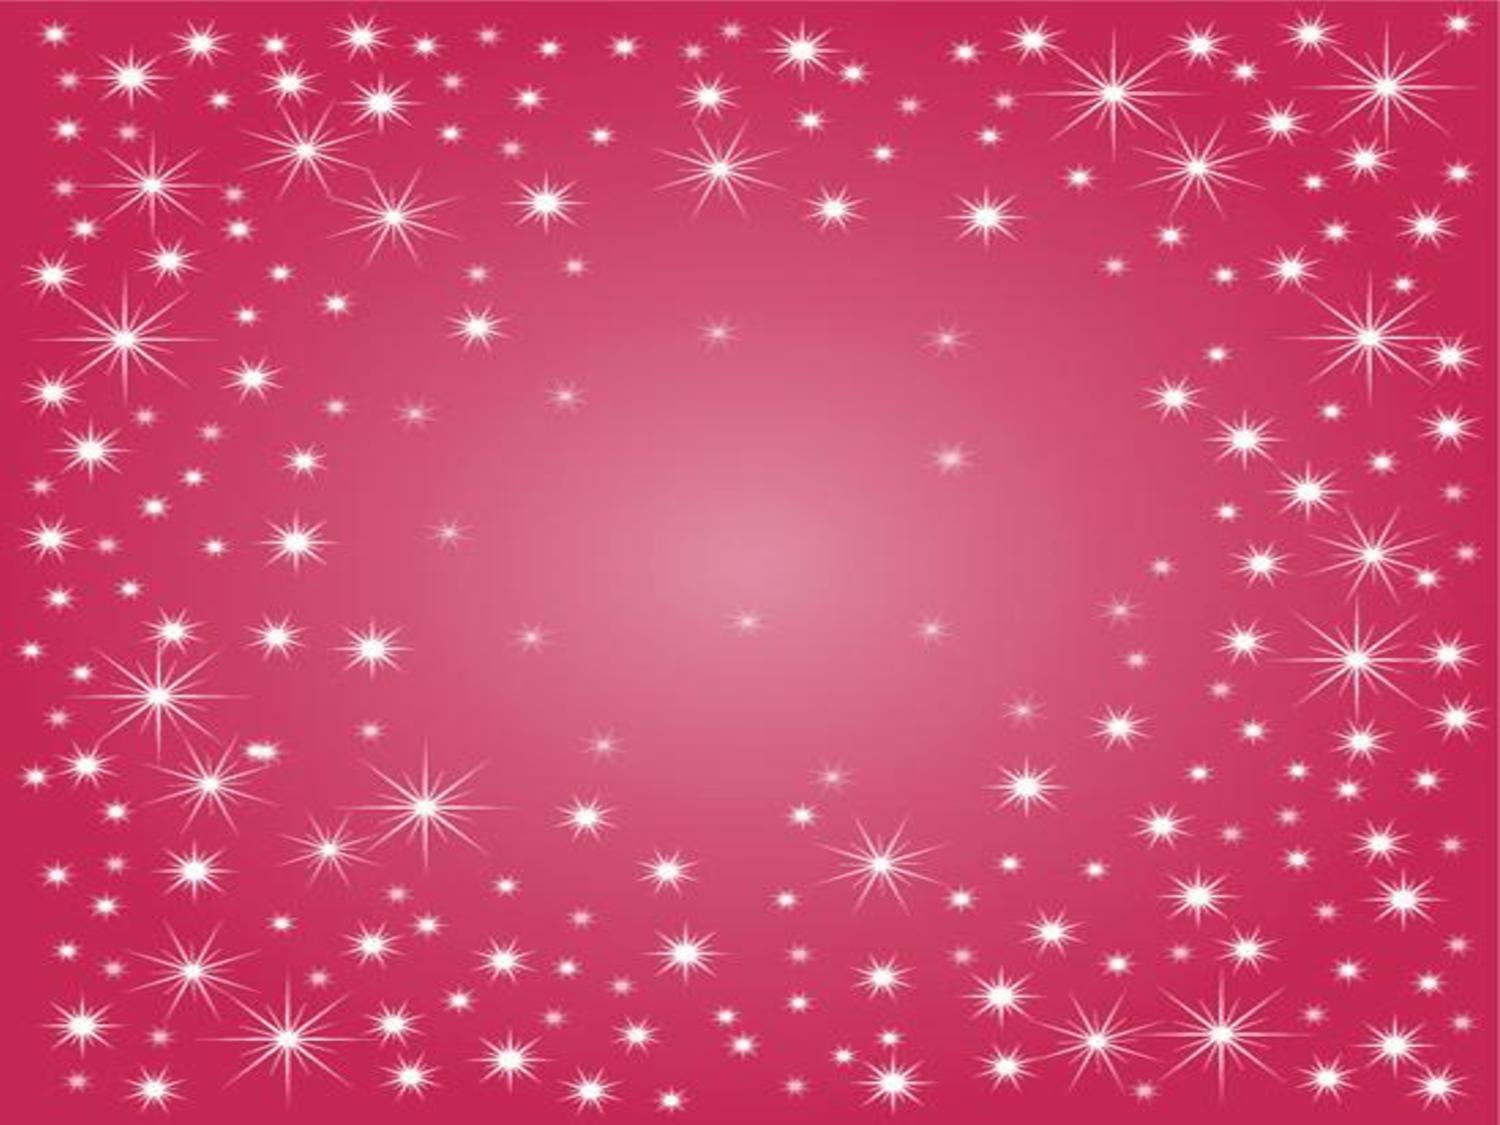 Wallpaper For > Pretty Pink Sparkly Background For Desktops